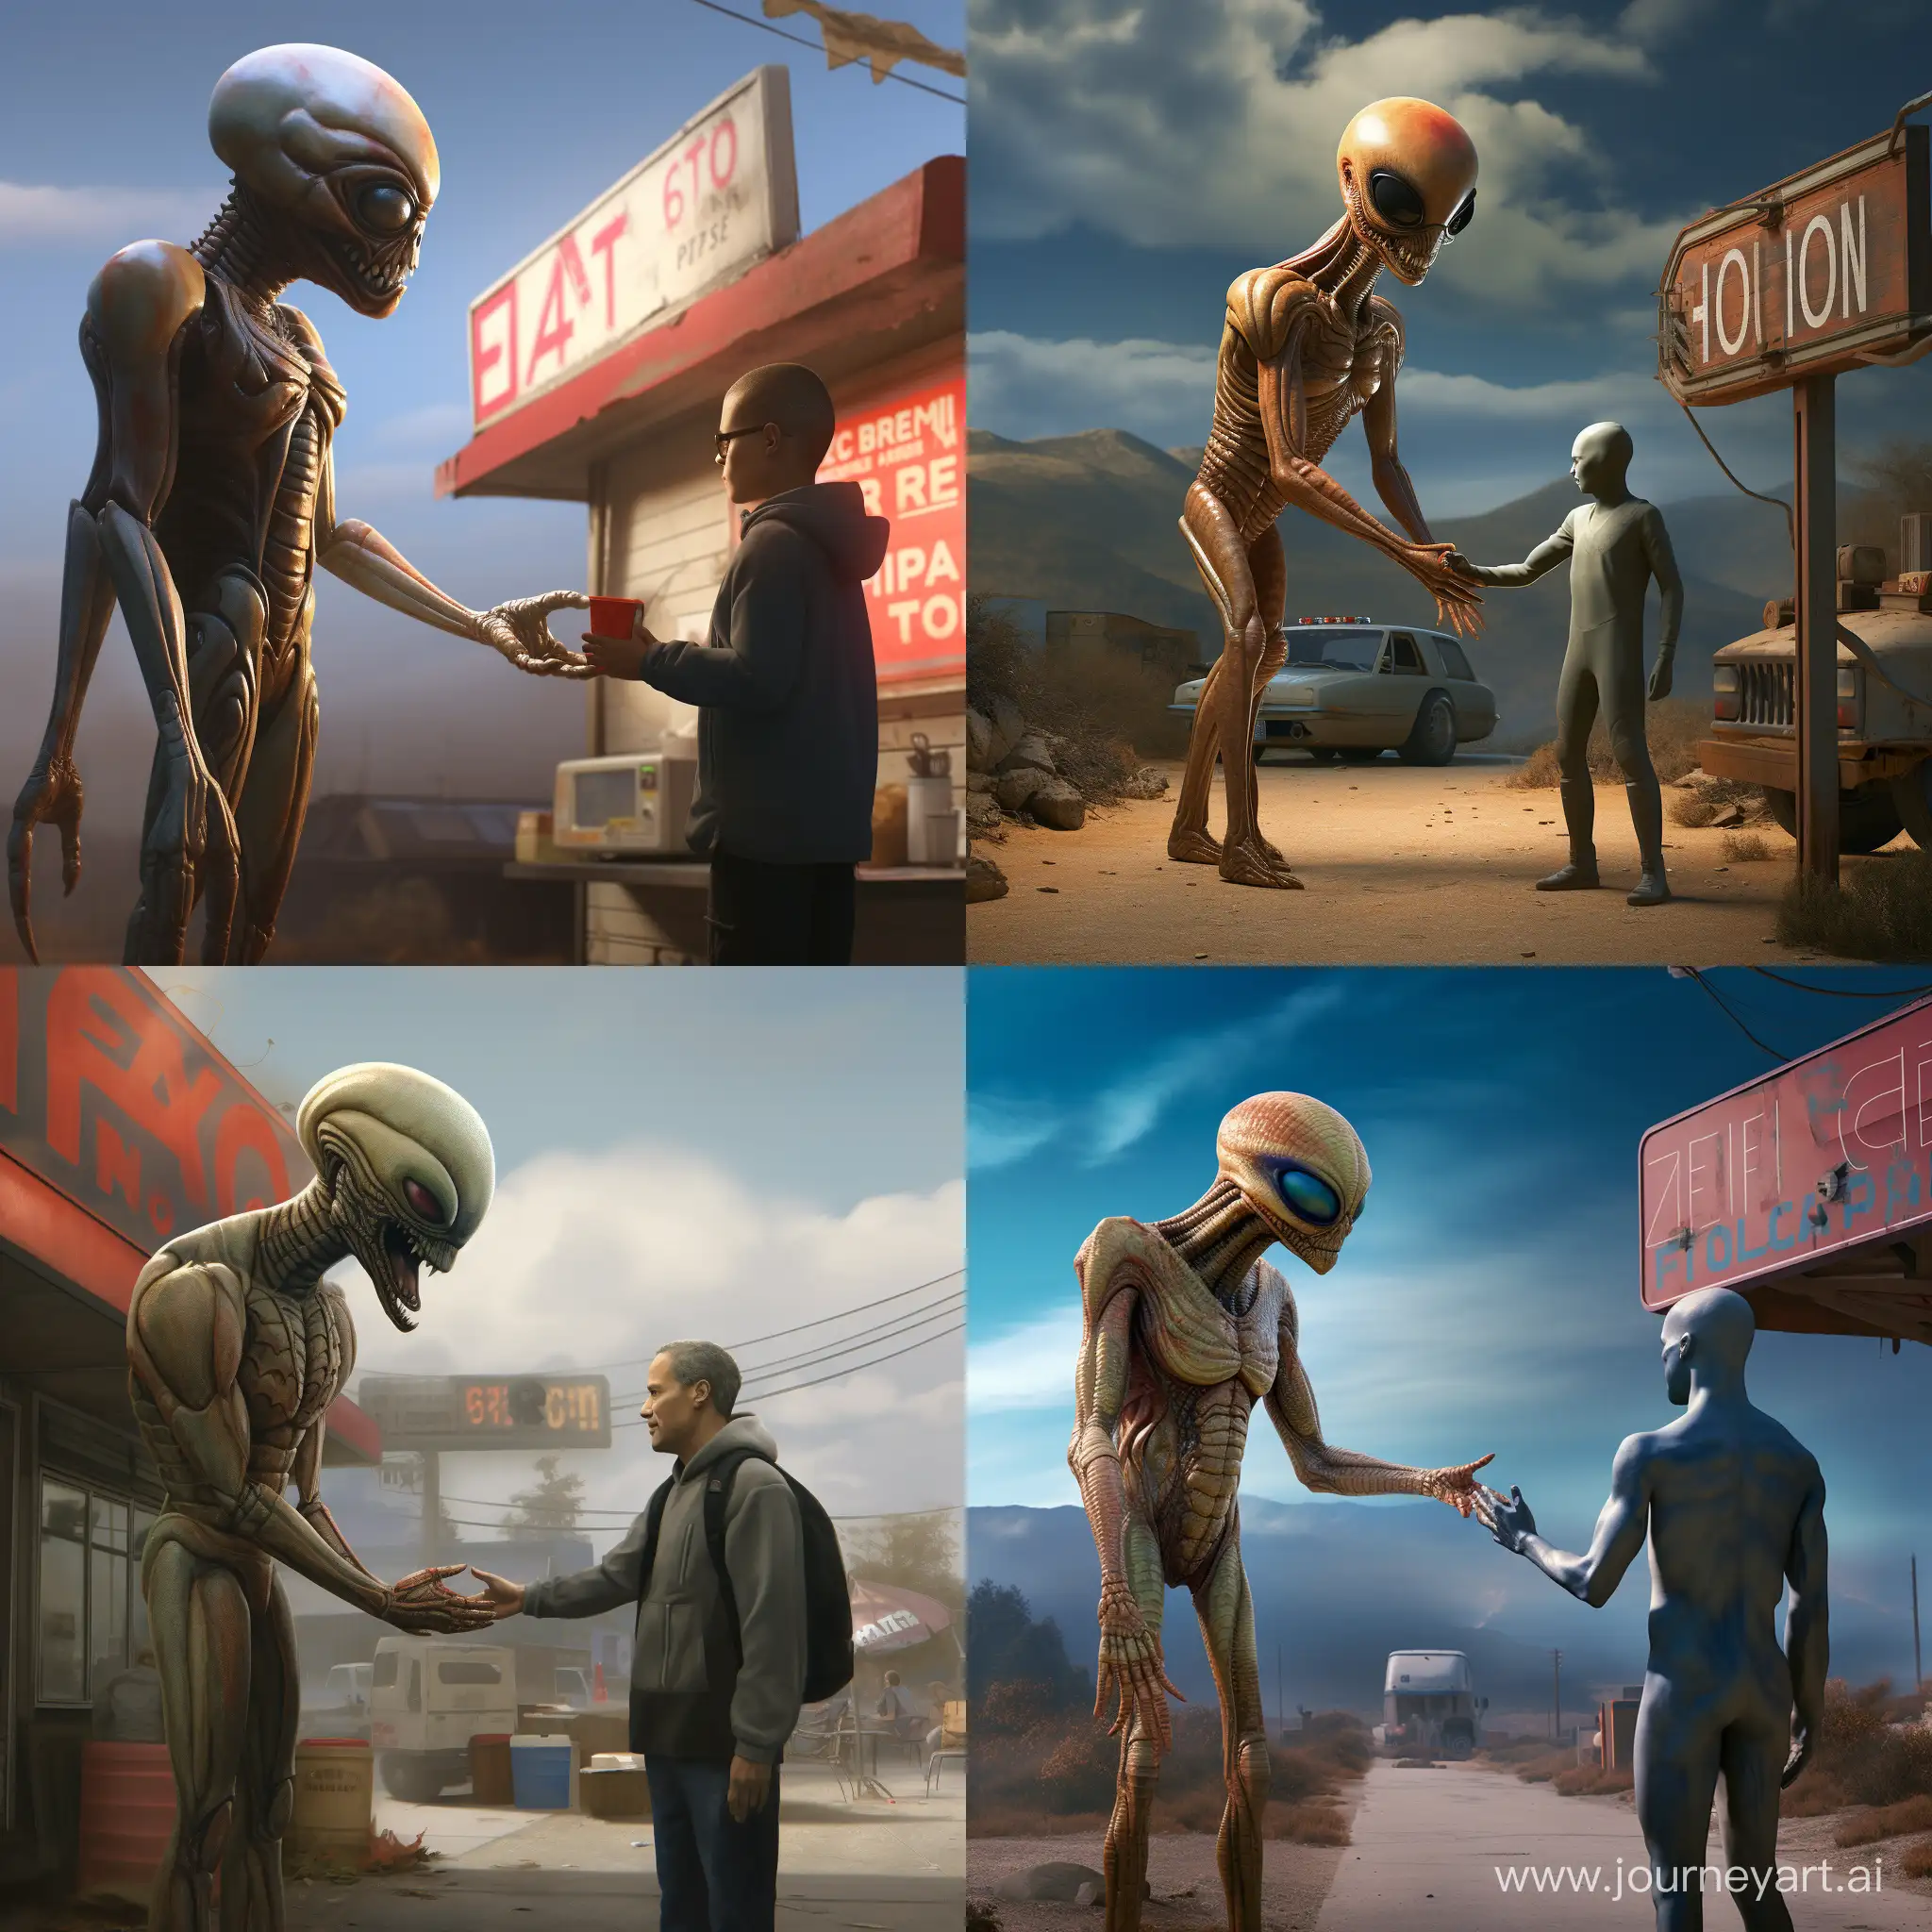 The alien ET shaking hands with Spider-Man, Next to a sign that says “1046” realistic, cinematic 